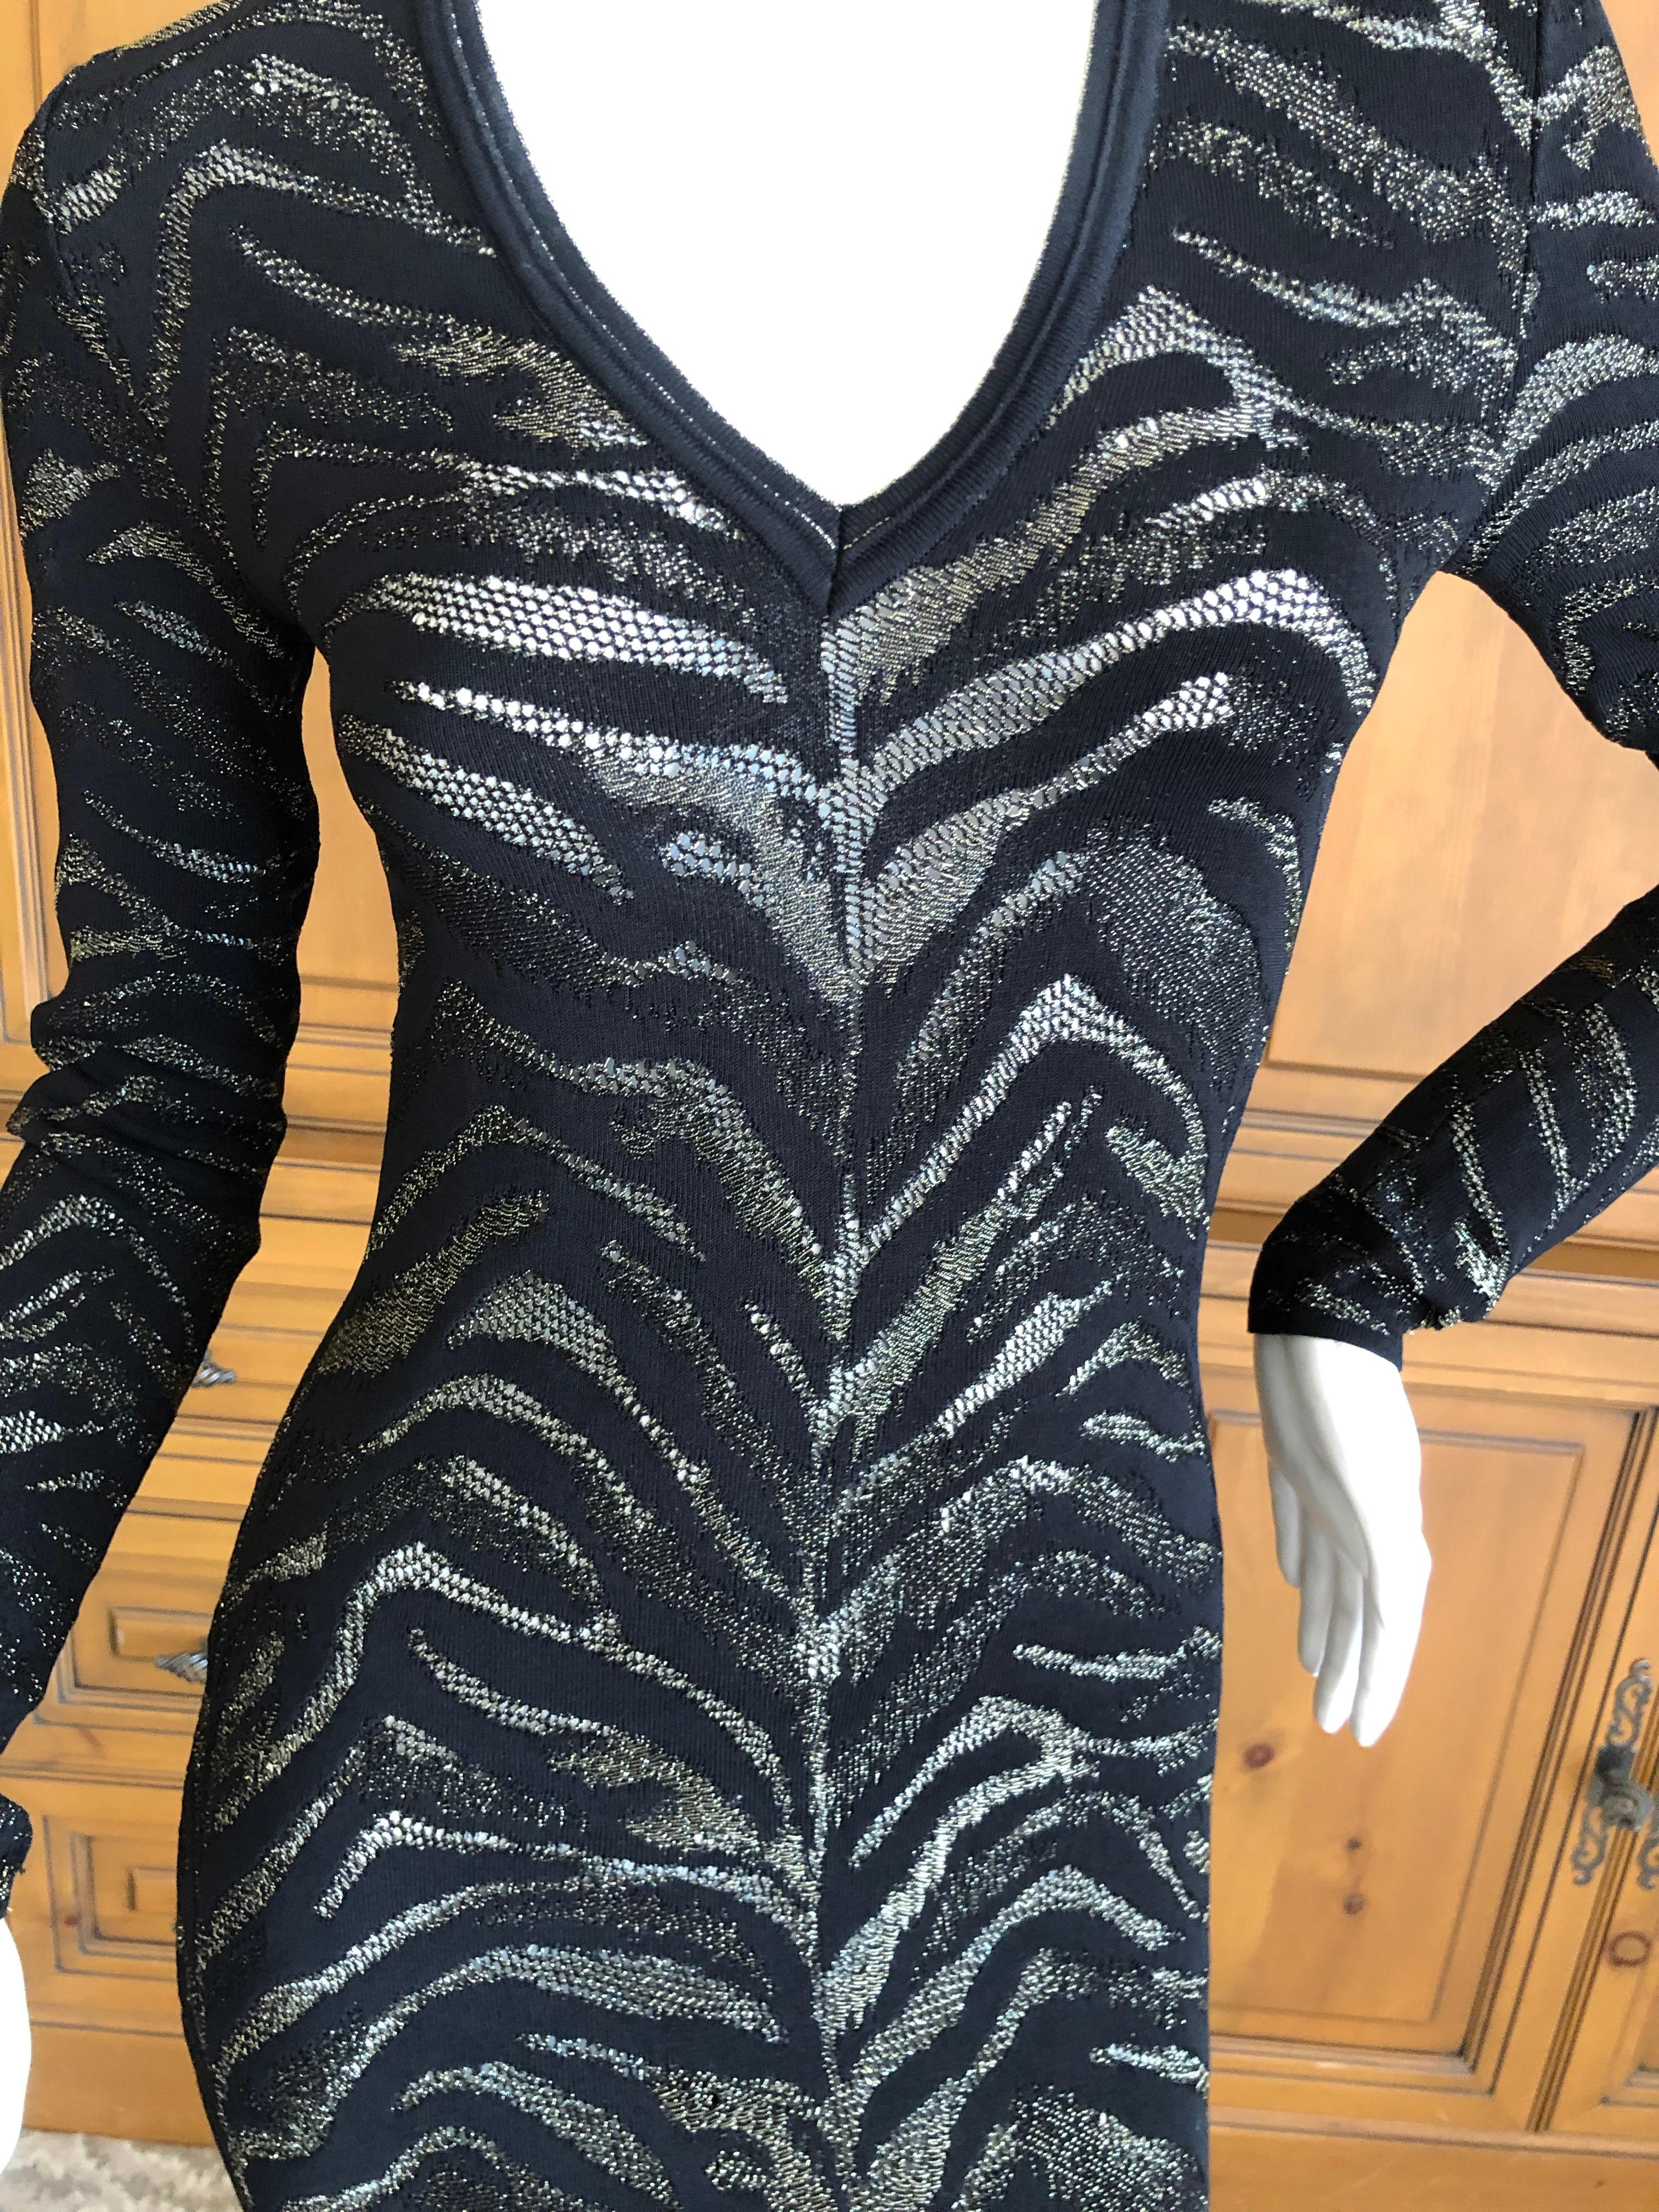 Roberto Cavalli Sheer Vintage Gold and Black Knit Zebra Pattern Evening Dress In Excellent Condition For Sale In Cloverdale, CA